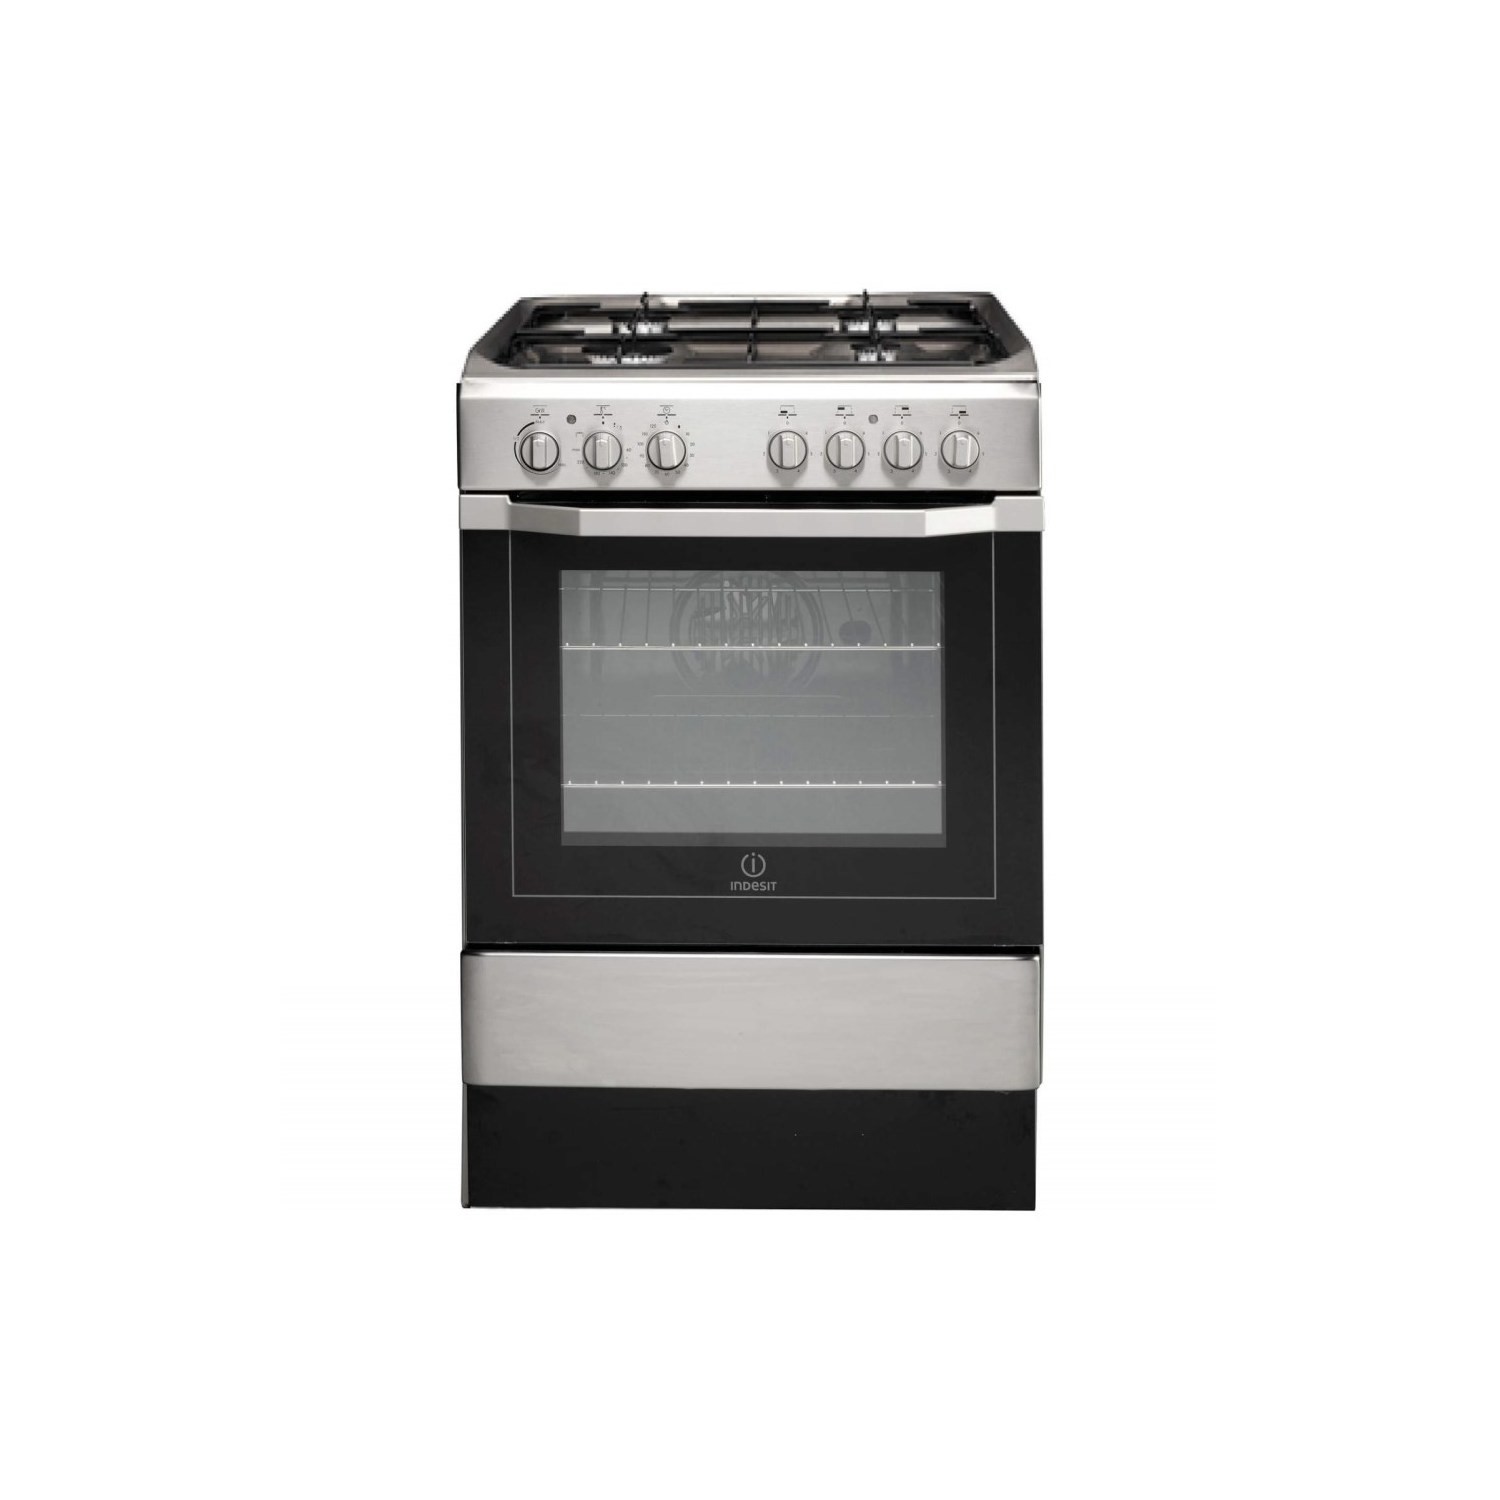 Indesit 60cm Dual Fuel Cooker - Stainless Steel